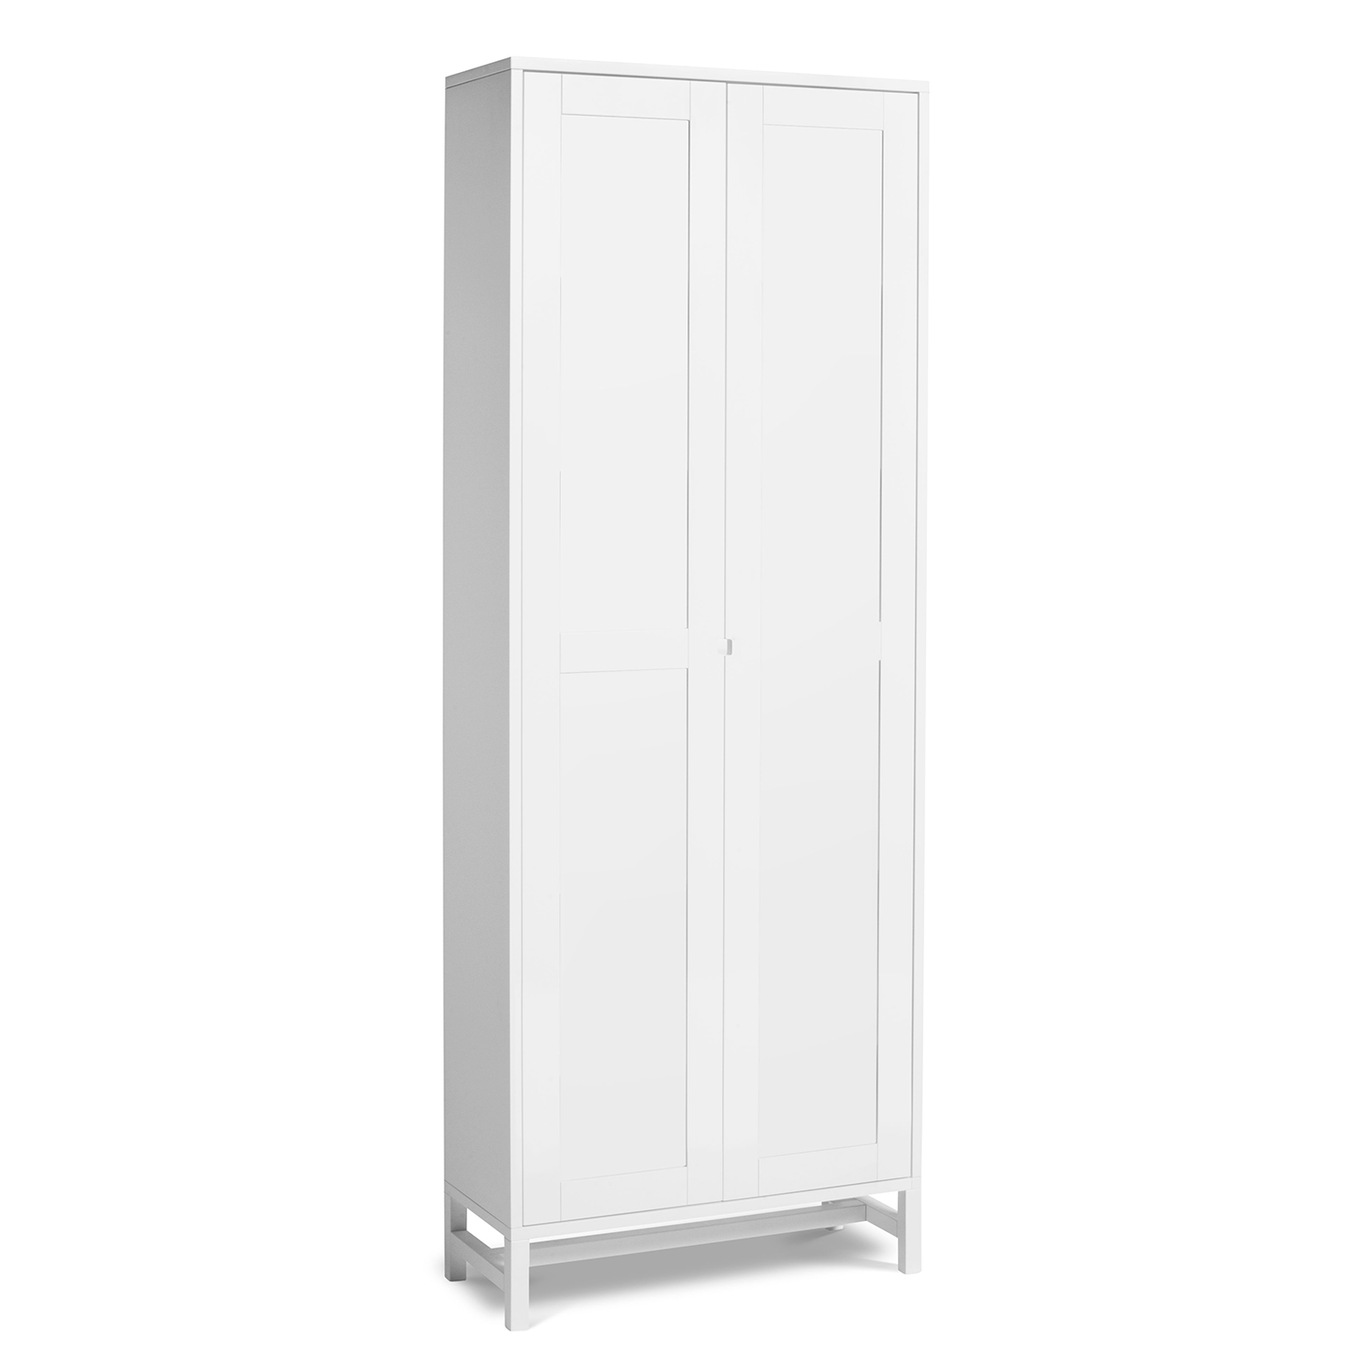 Falsterbo Cabinet 190 cm Covered Doors, White